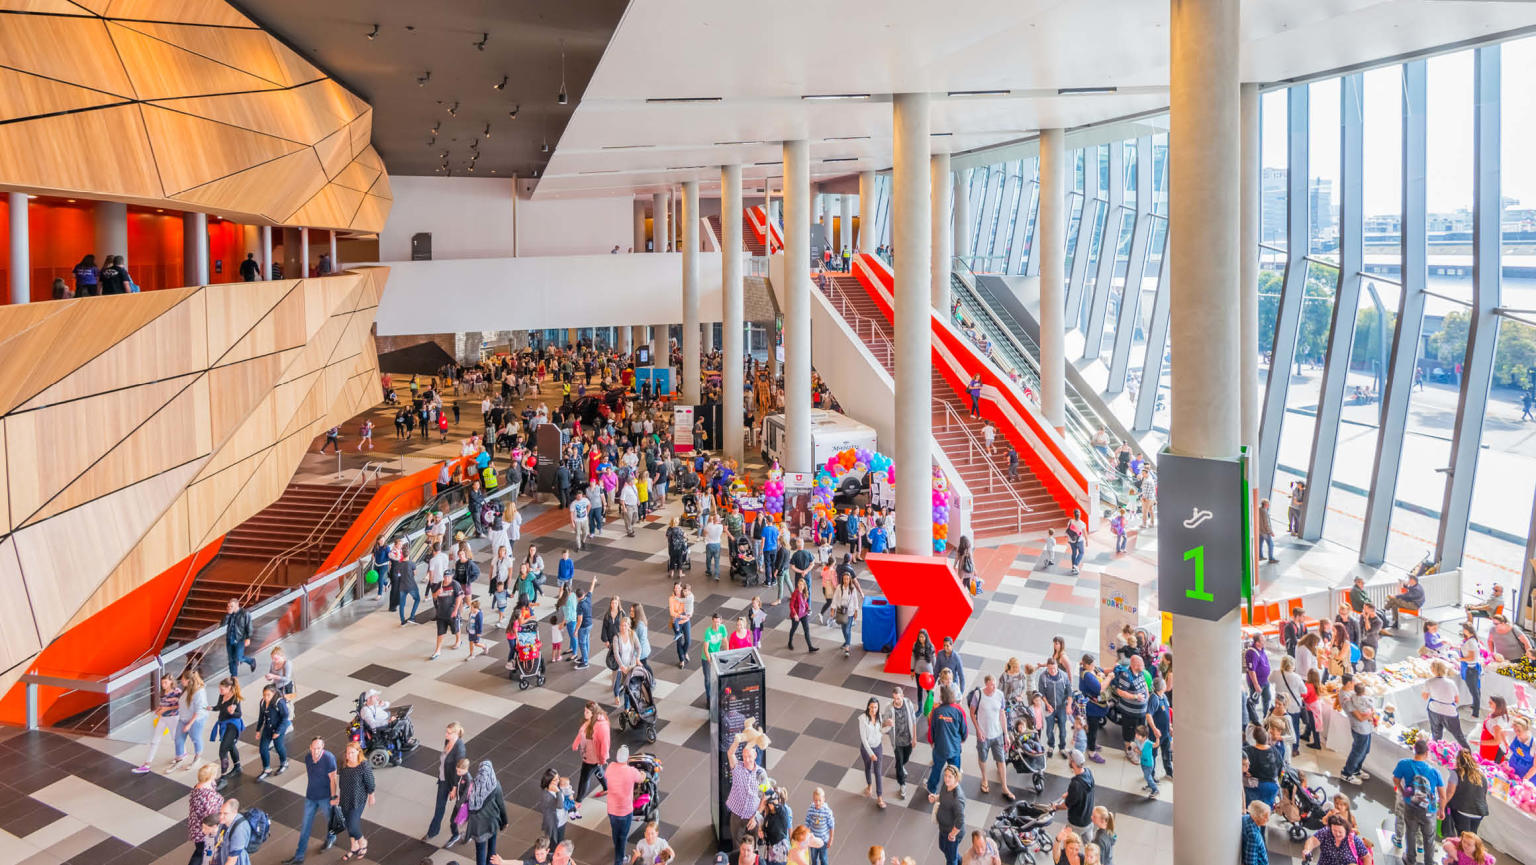 Image of a large foyer area within the Melbourne Convention and Exhibition Centre (MCEC). The foyer is filled with people walking around. There are concrete pillars, stairs, large windows and a wooden wall. The foyer is well-lit and appears to be a busy place.